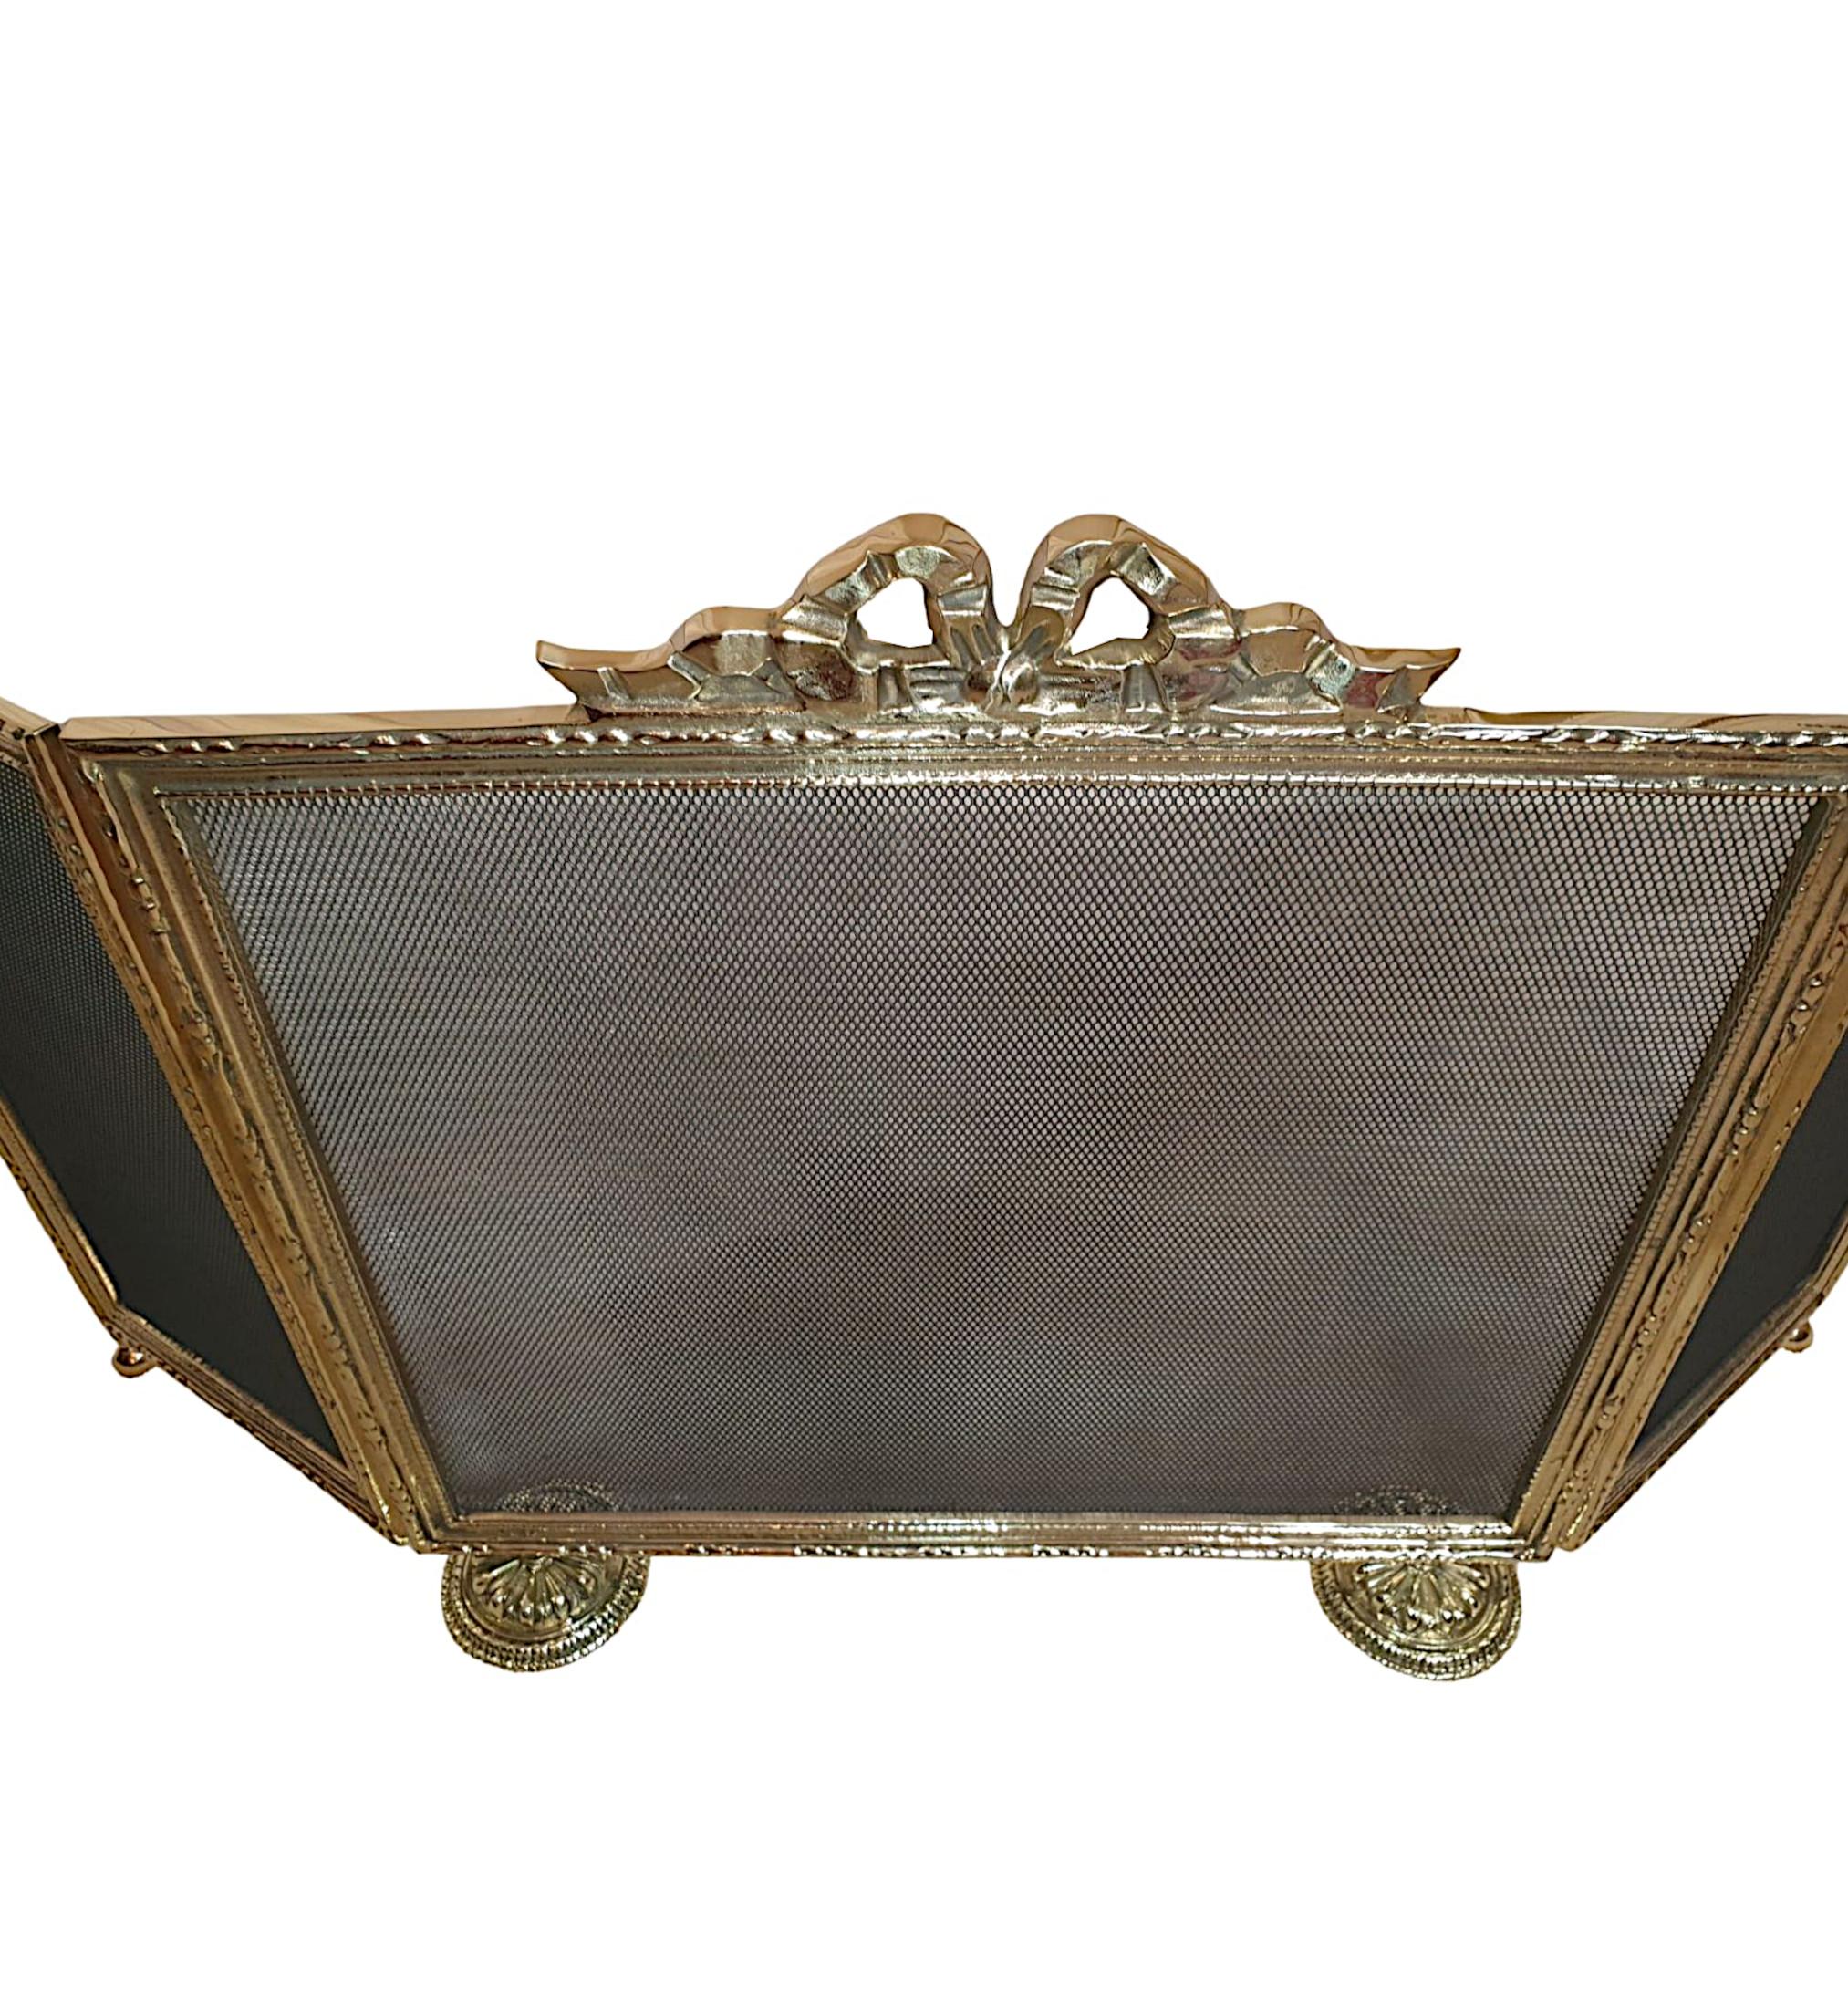 A stunning 19th century French free standing three panel brass fire screen. The protective mesh wire is set within a fine quality frame surmounted with elegant carrying handle of ribbon bow mo-tif. The frame is intricately embossed with decorative